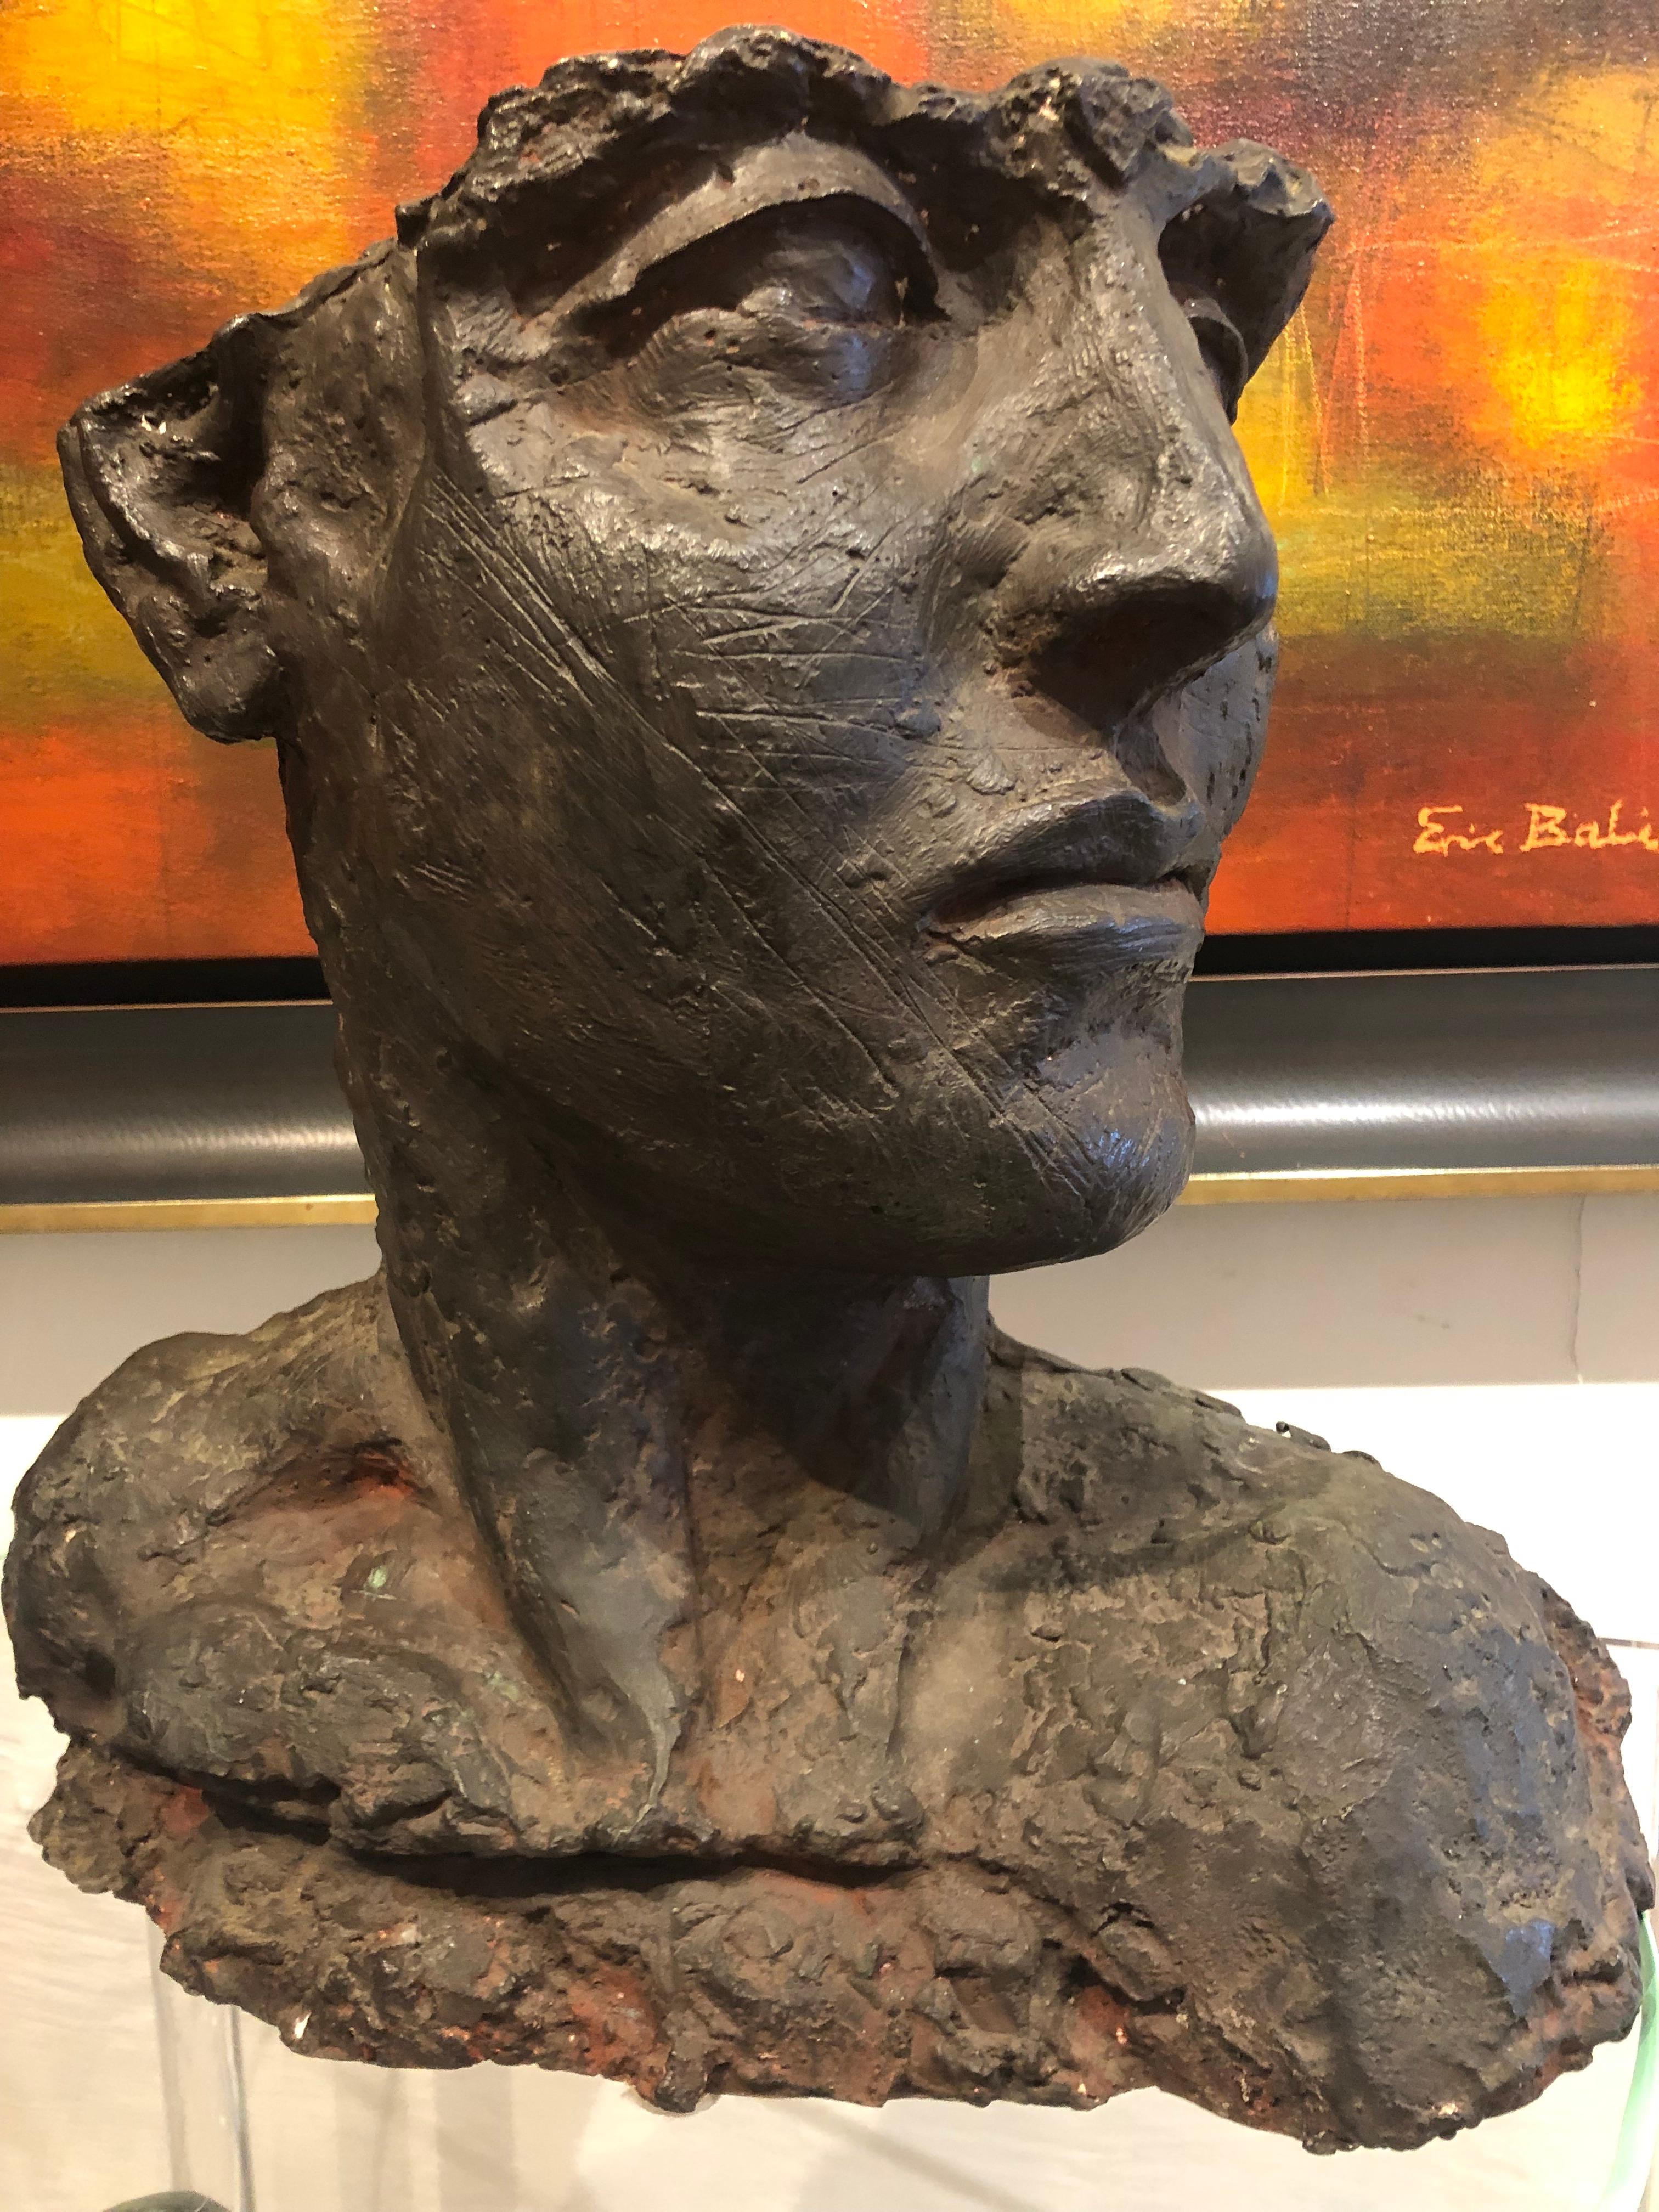 Bust of a Woman, bronze sculptue.
Bronze with dark brown patina signed on the back R. Cortazar 1/9.
Originally from Tapachula, Chiapas Mexico, he was born in 1962 into a family dedicated directly or indirectly to arts and crafts. His deep artistic